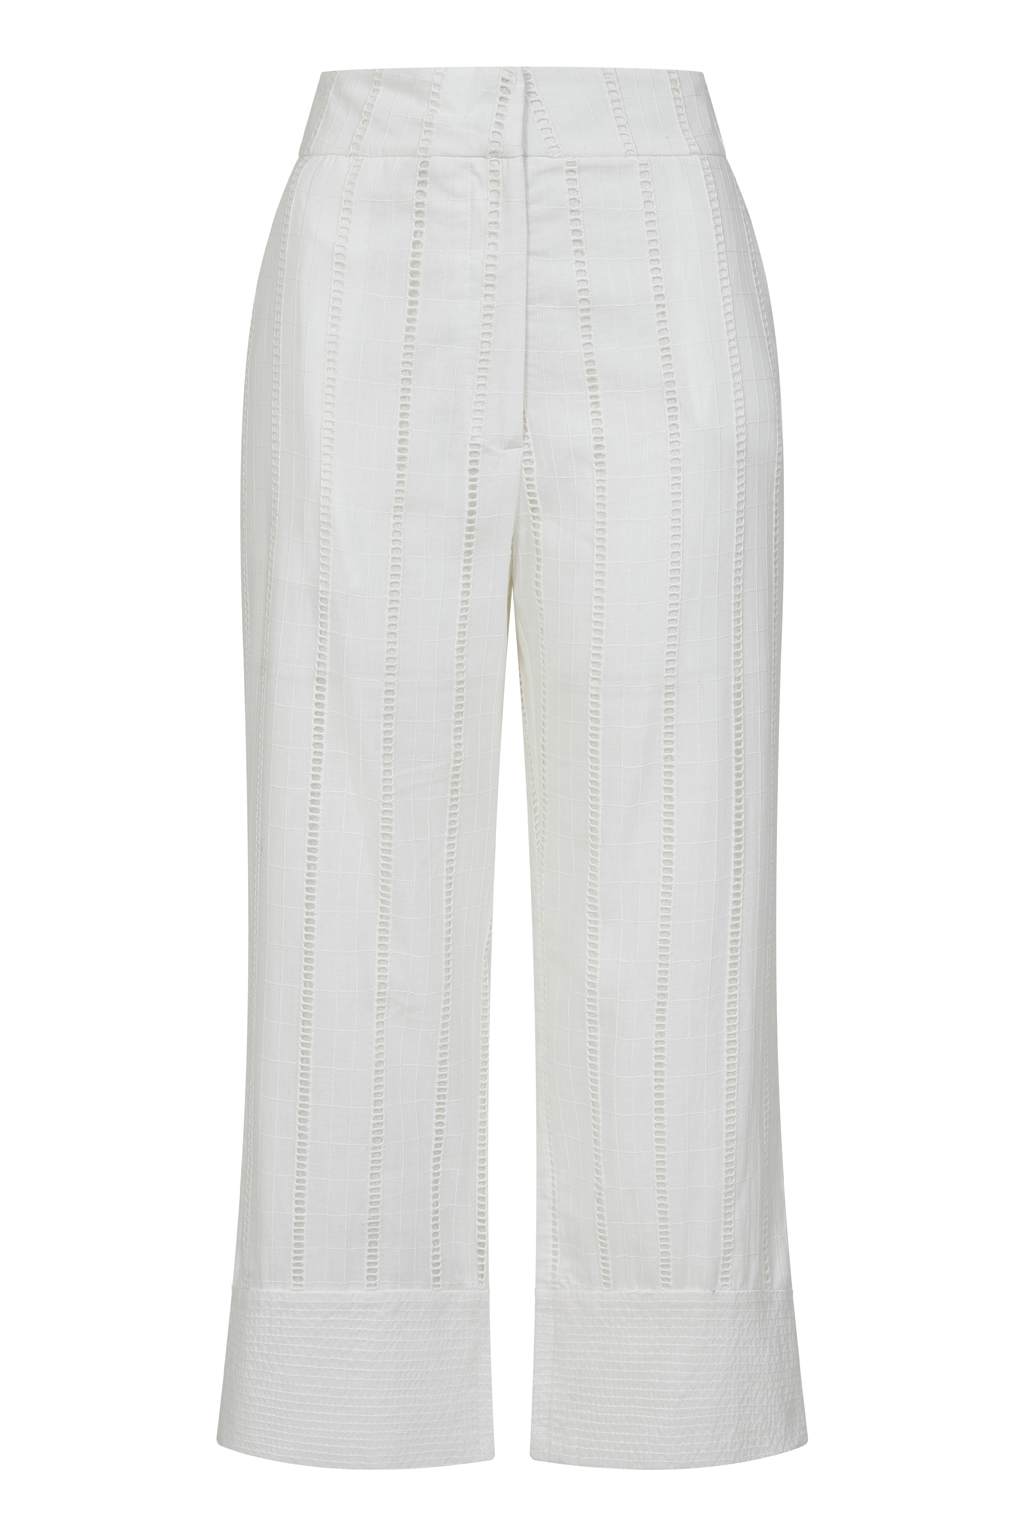 ALICE COLLINS JESS PANT-WHITE - Twine Clothing